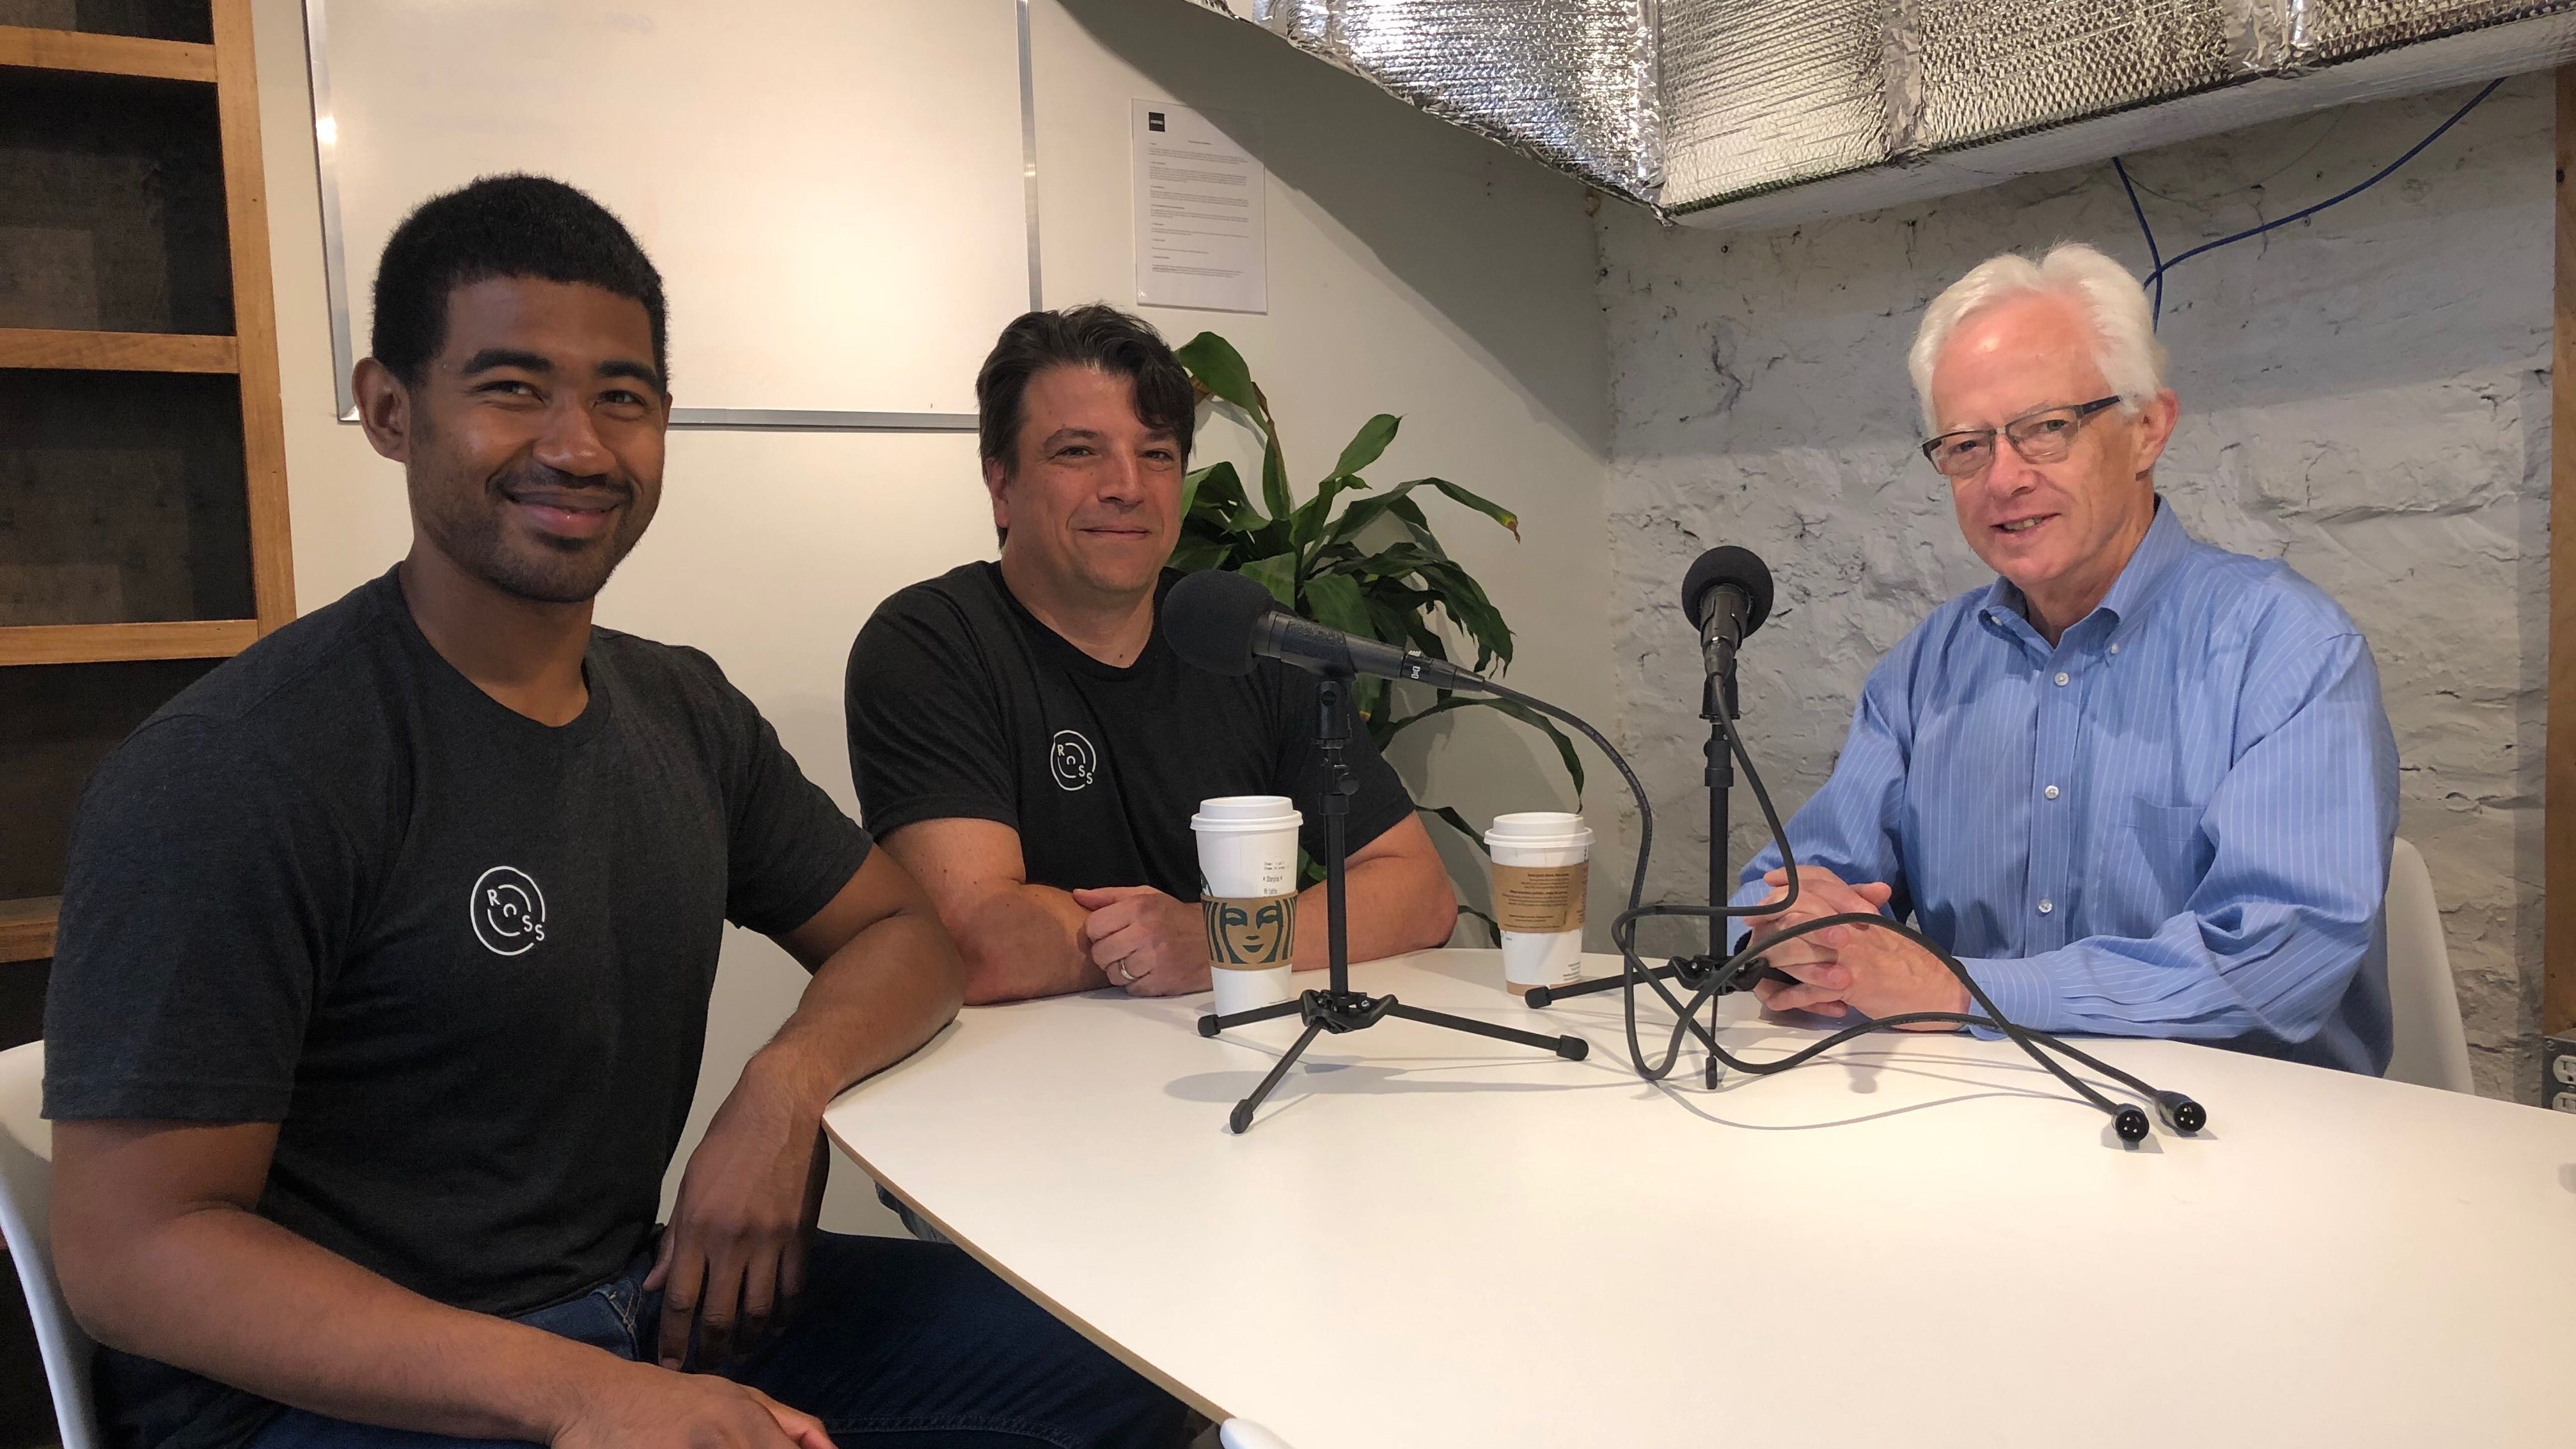 LawNext Episode 54: The AI Behind ROSS, with CTO Jimoh Ovbiagele and Head of Engineering Stergios Anastasiadis 